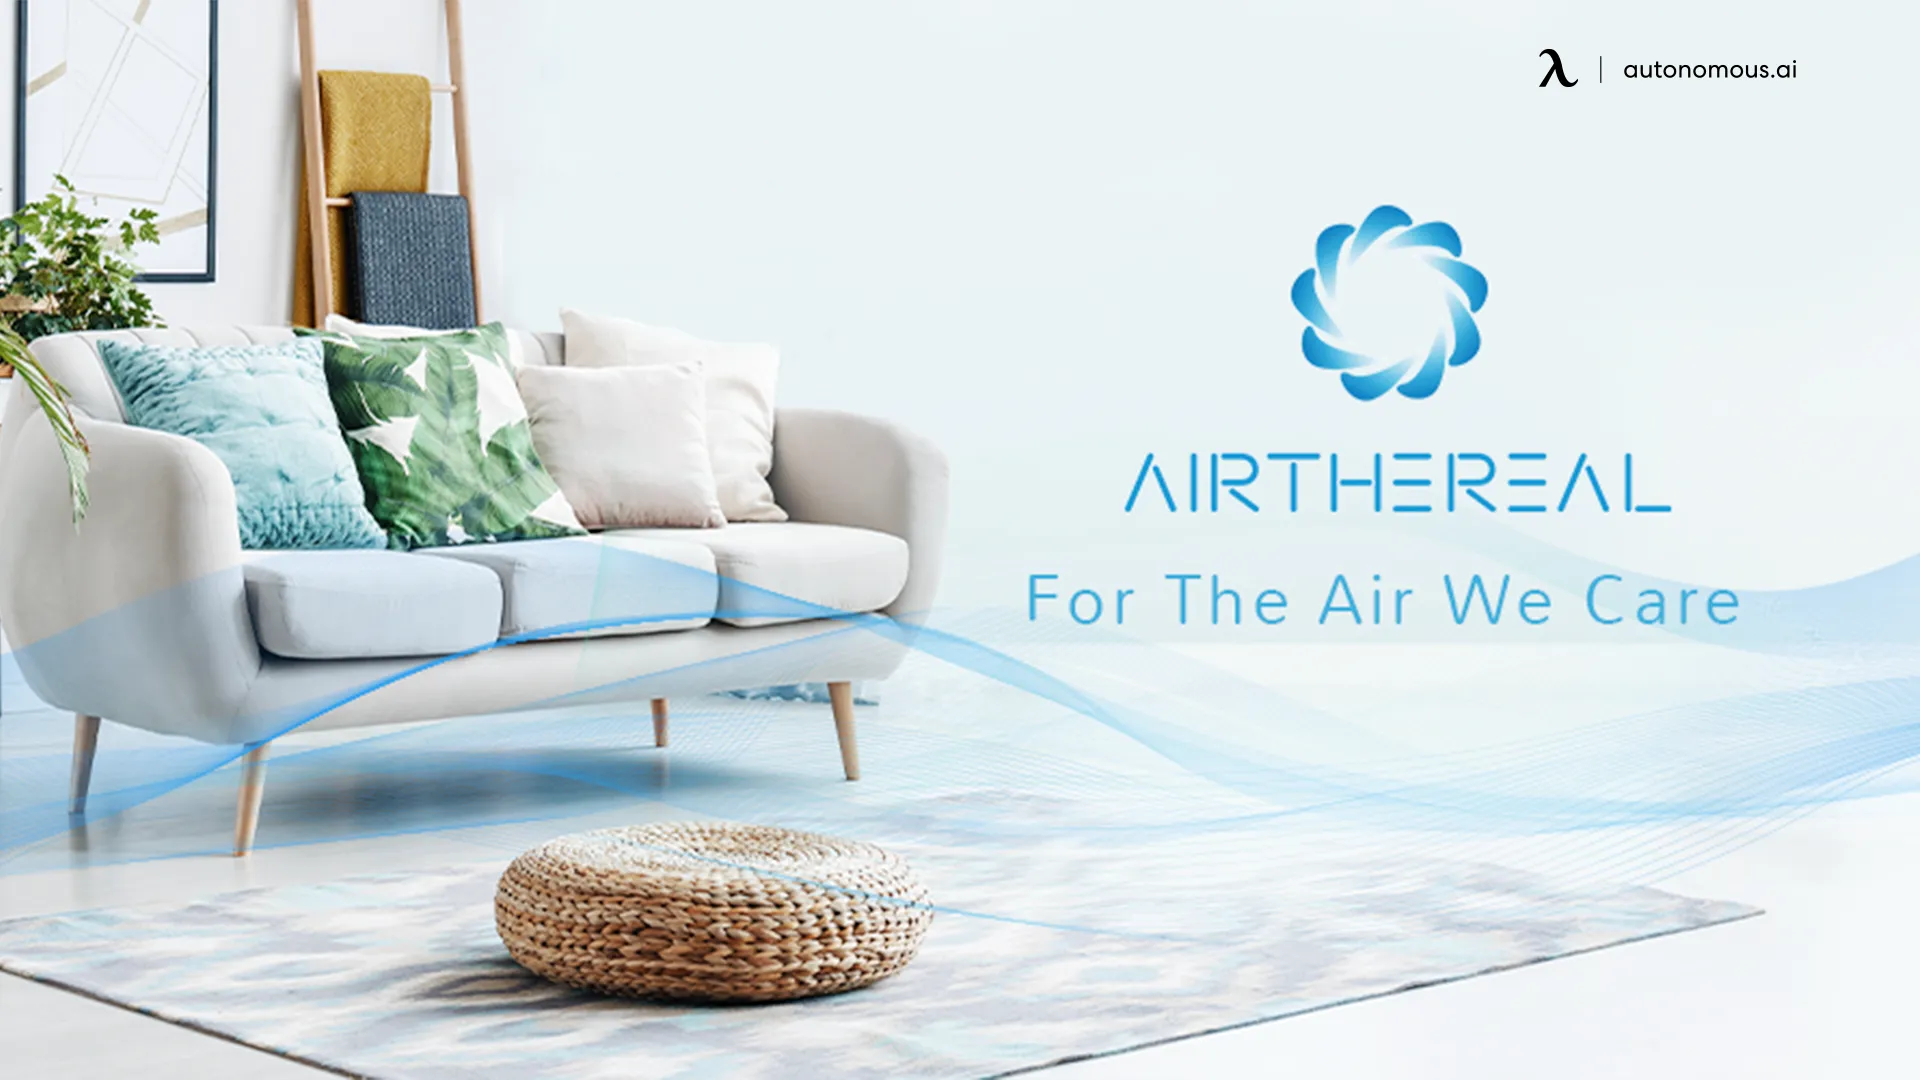 About The Brand - Airthereal air purifier